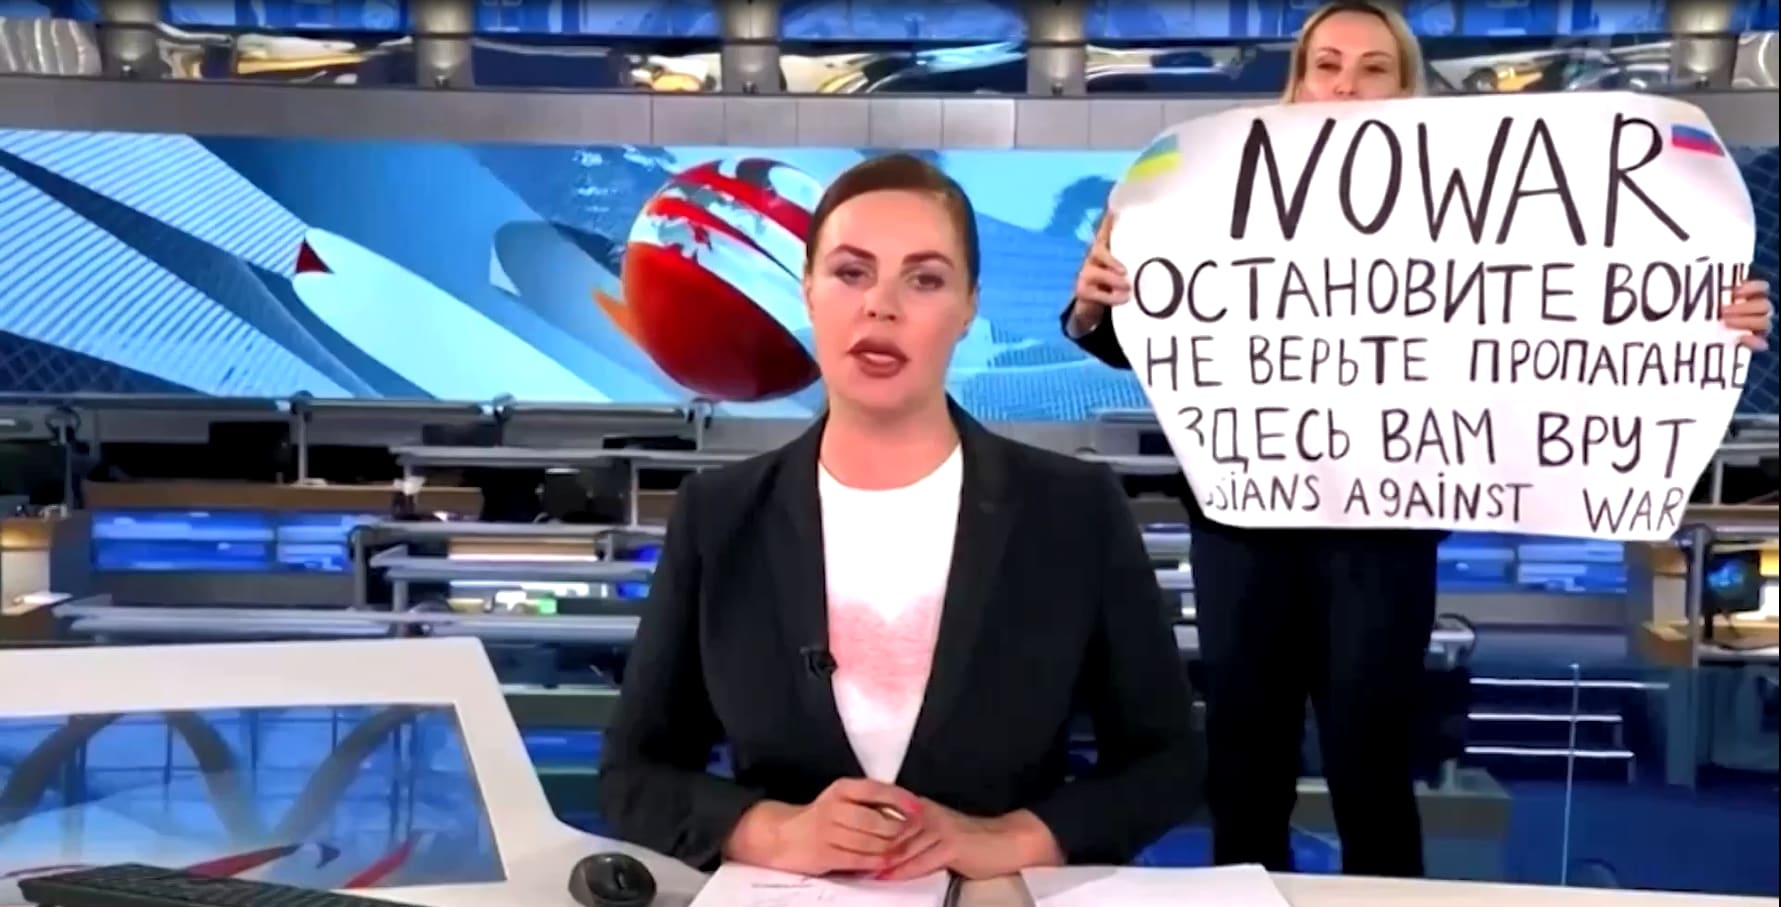 Ovsyannikova staged an extraordinary show of dissent on Monday night when she held up an anti-war sign behind a studio presenter reading the news on Channel One and shouted slogans condemning Russia's Feb 24 invasion of Ukraine.